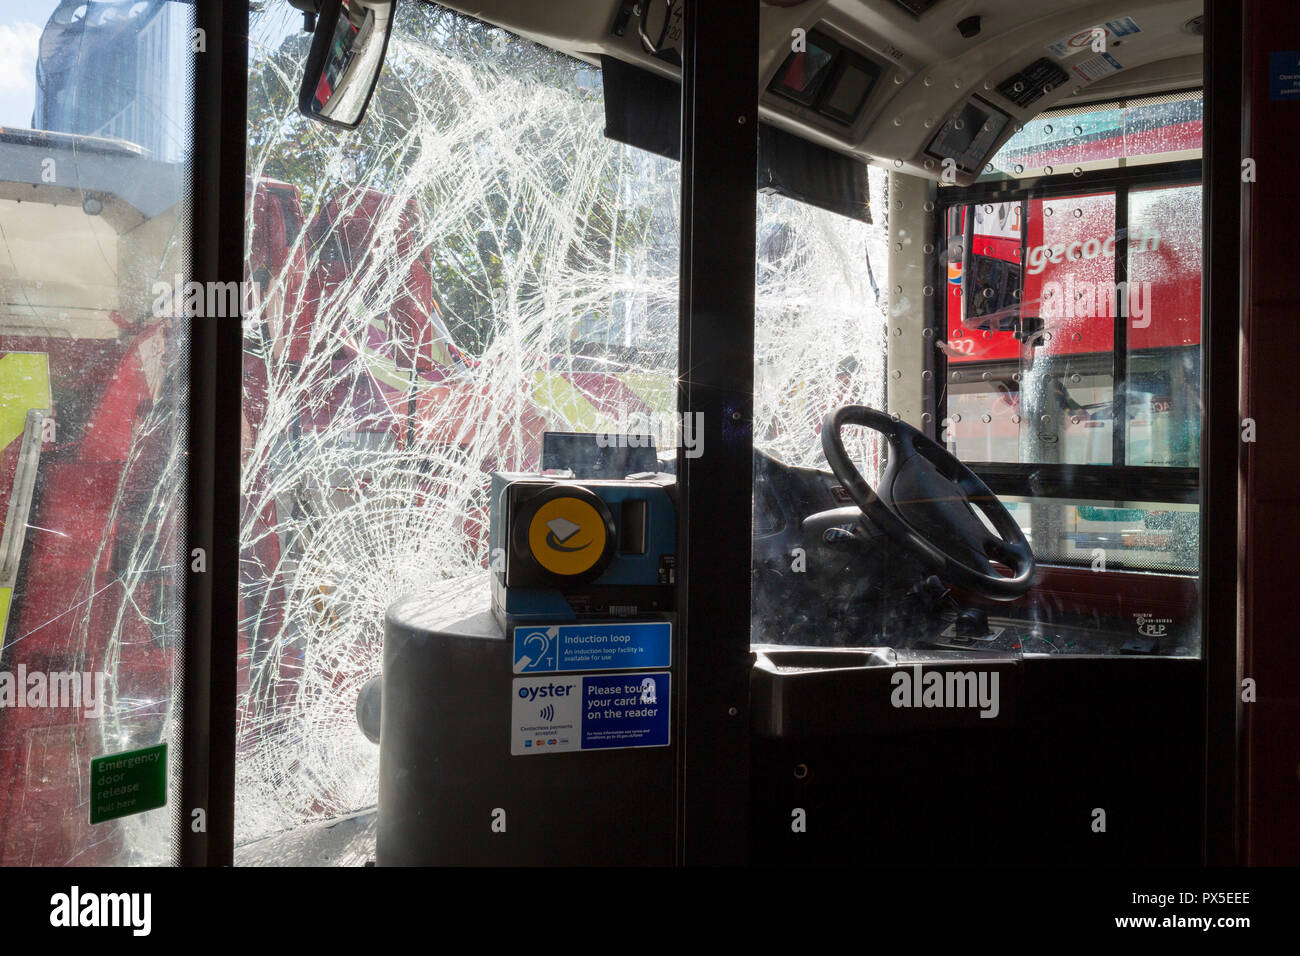 The resulting damage to a London bus's windscreen after a crash involving three buses at Elephant and Castle, on 16th October 2018, in London, England. Stock Photo